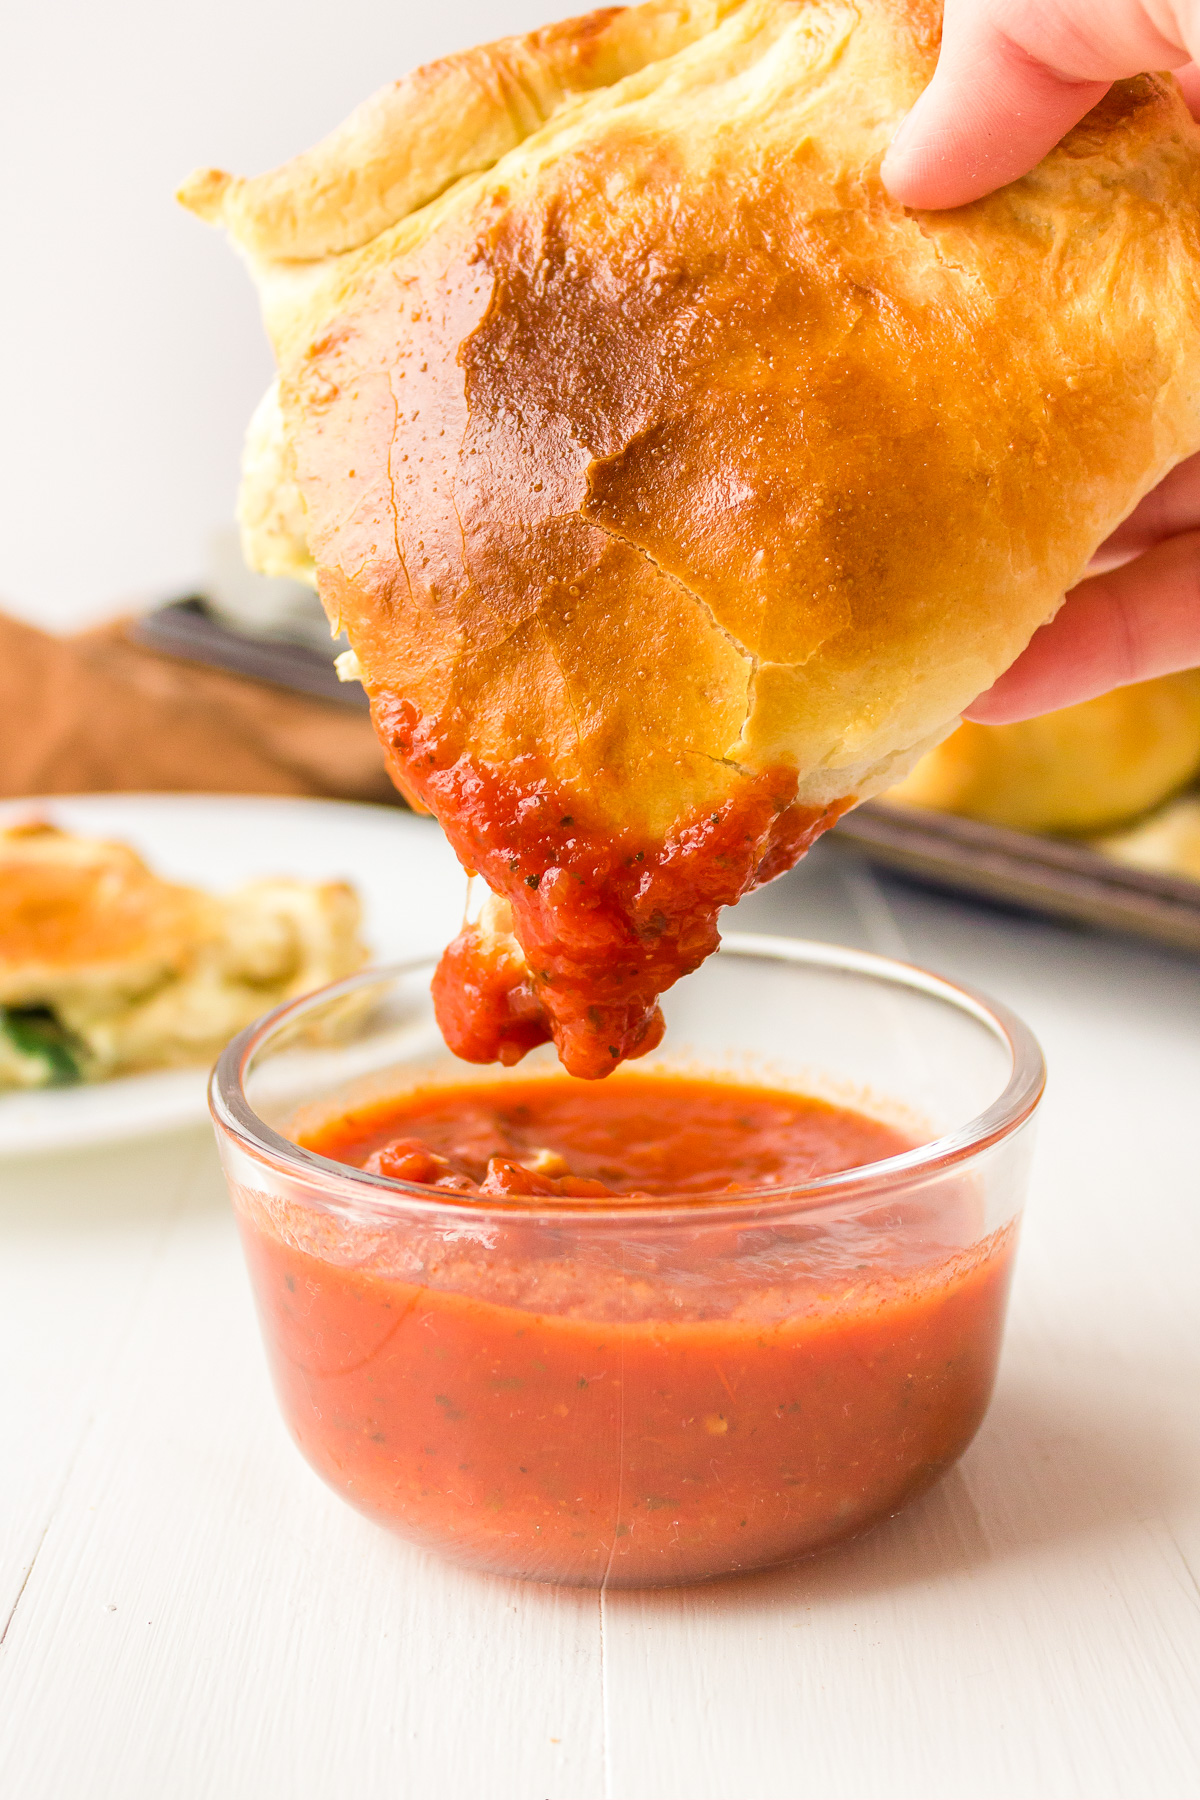 A person's hand dipping a chicken calzone into a bowl of marinara sauce.